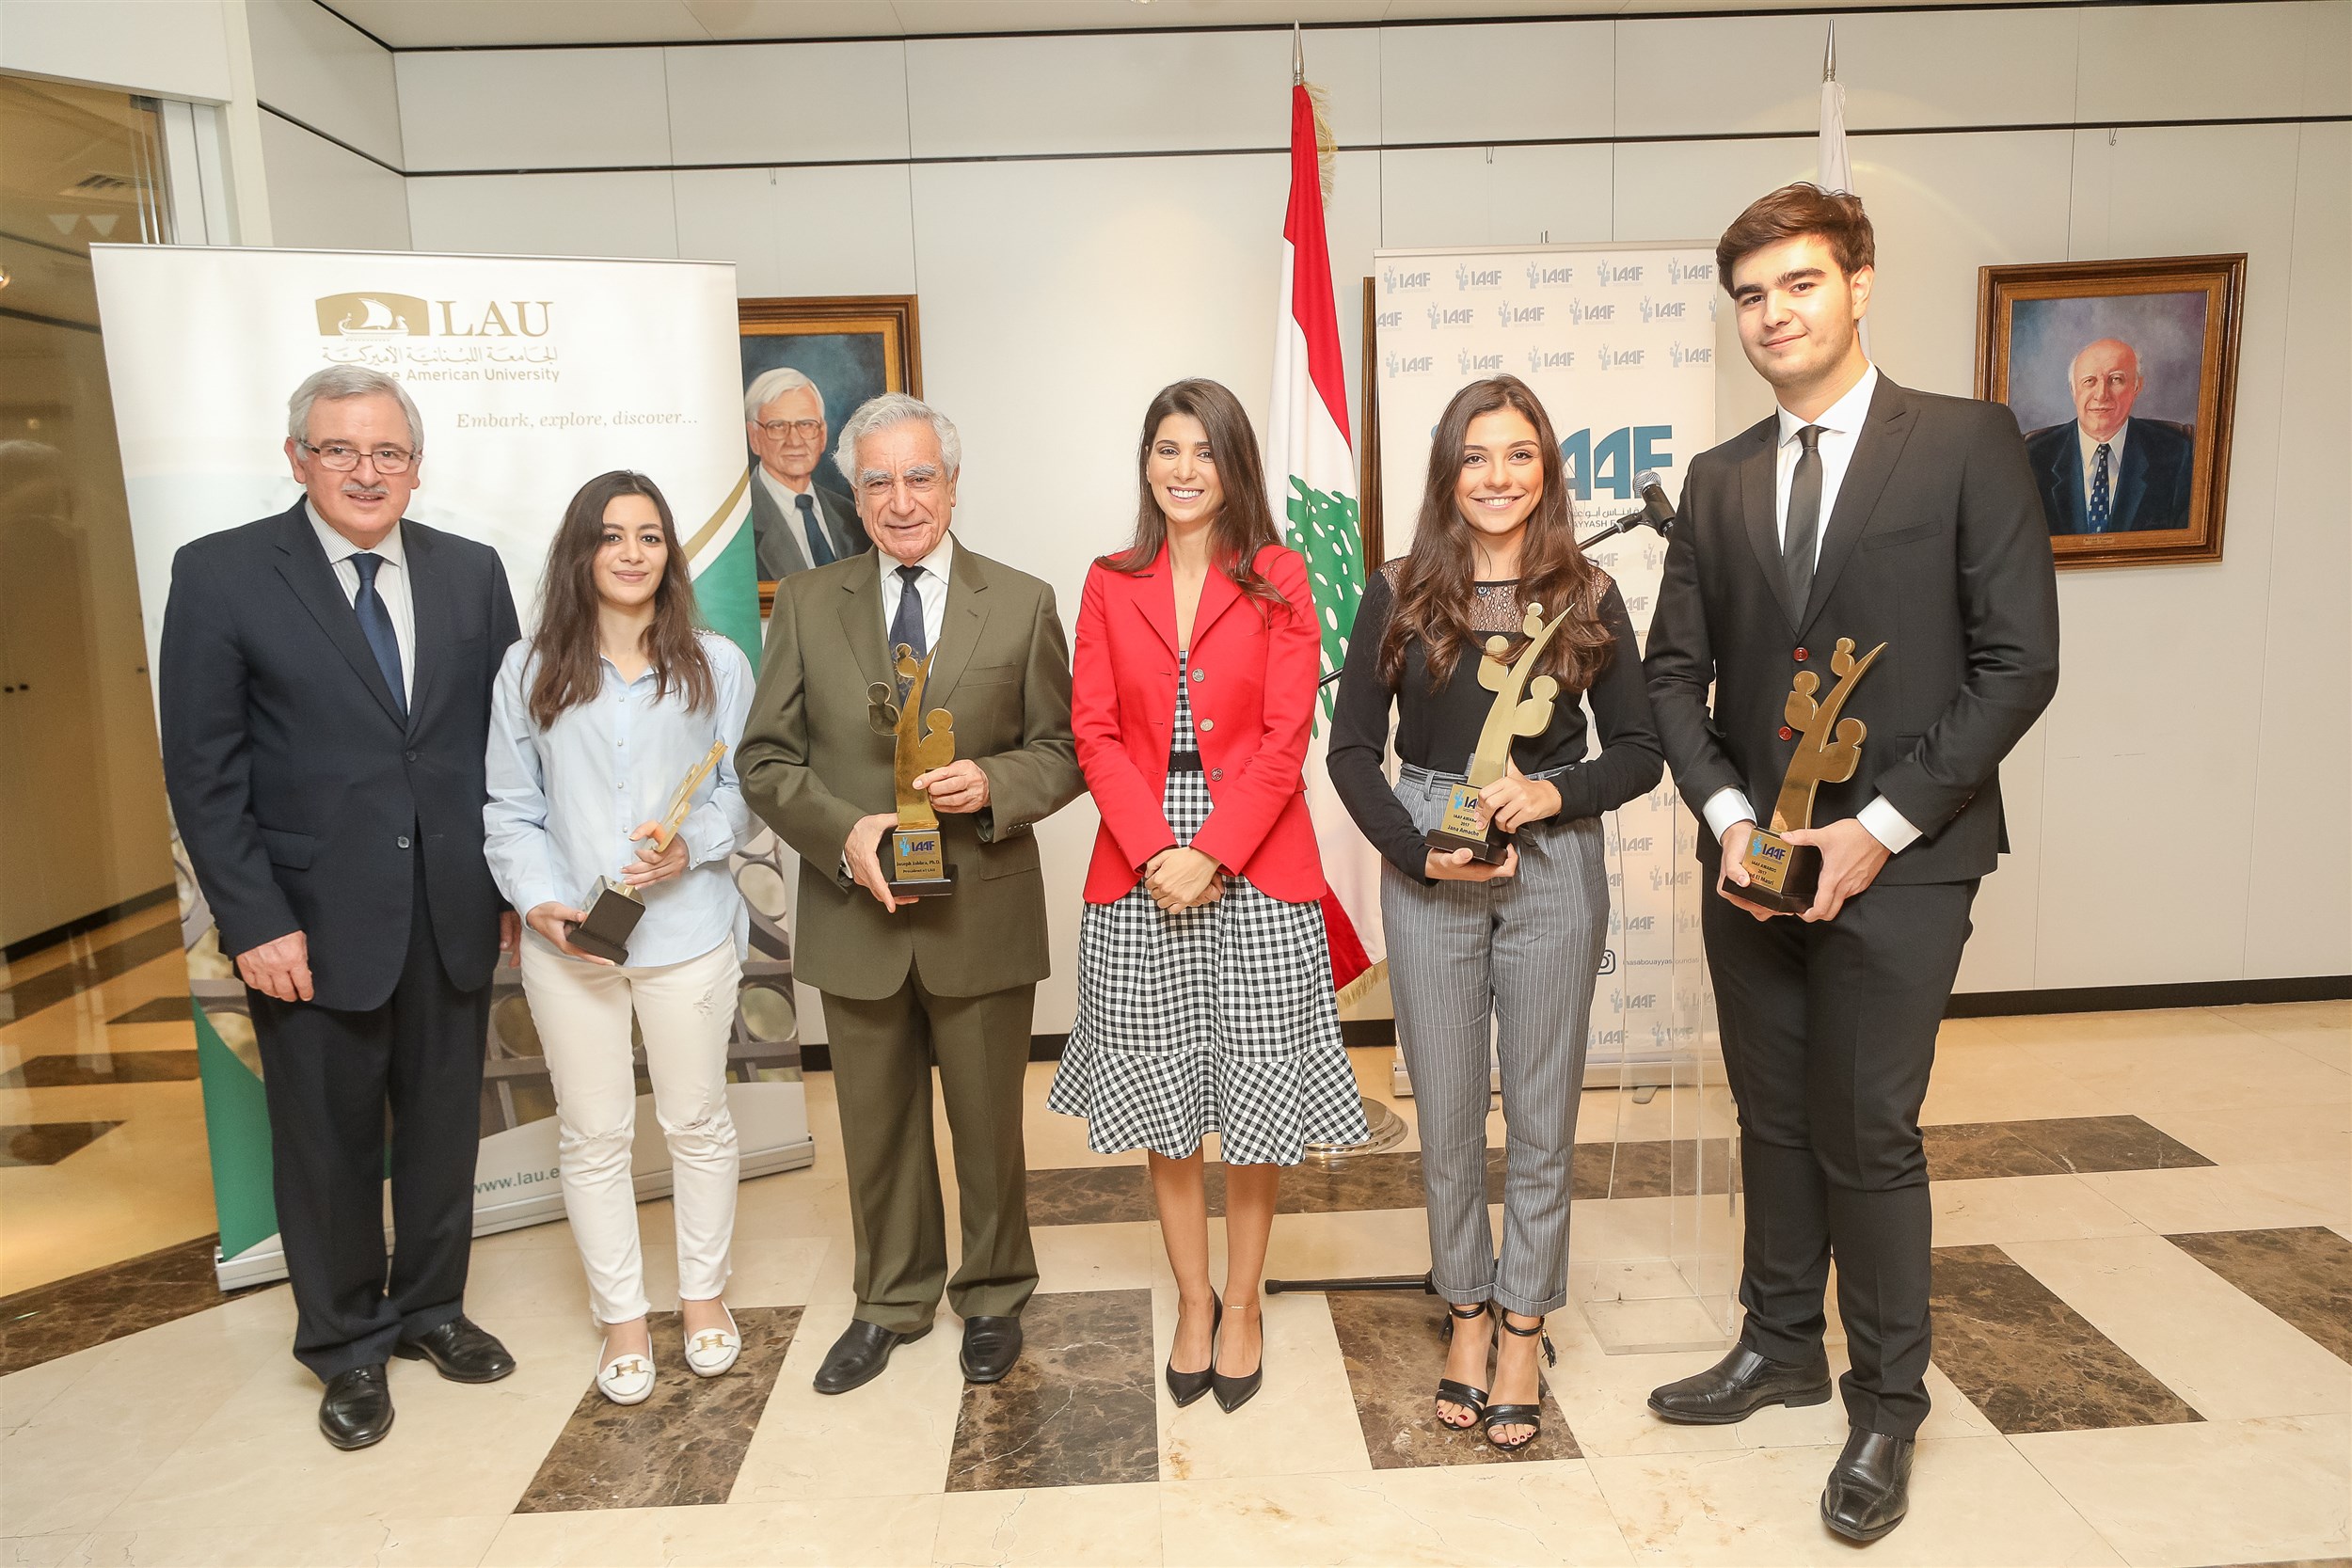 iaaf president with he minister jean ogassabian and lau president dr. joseph jabra with the winners